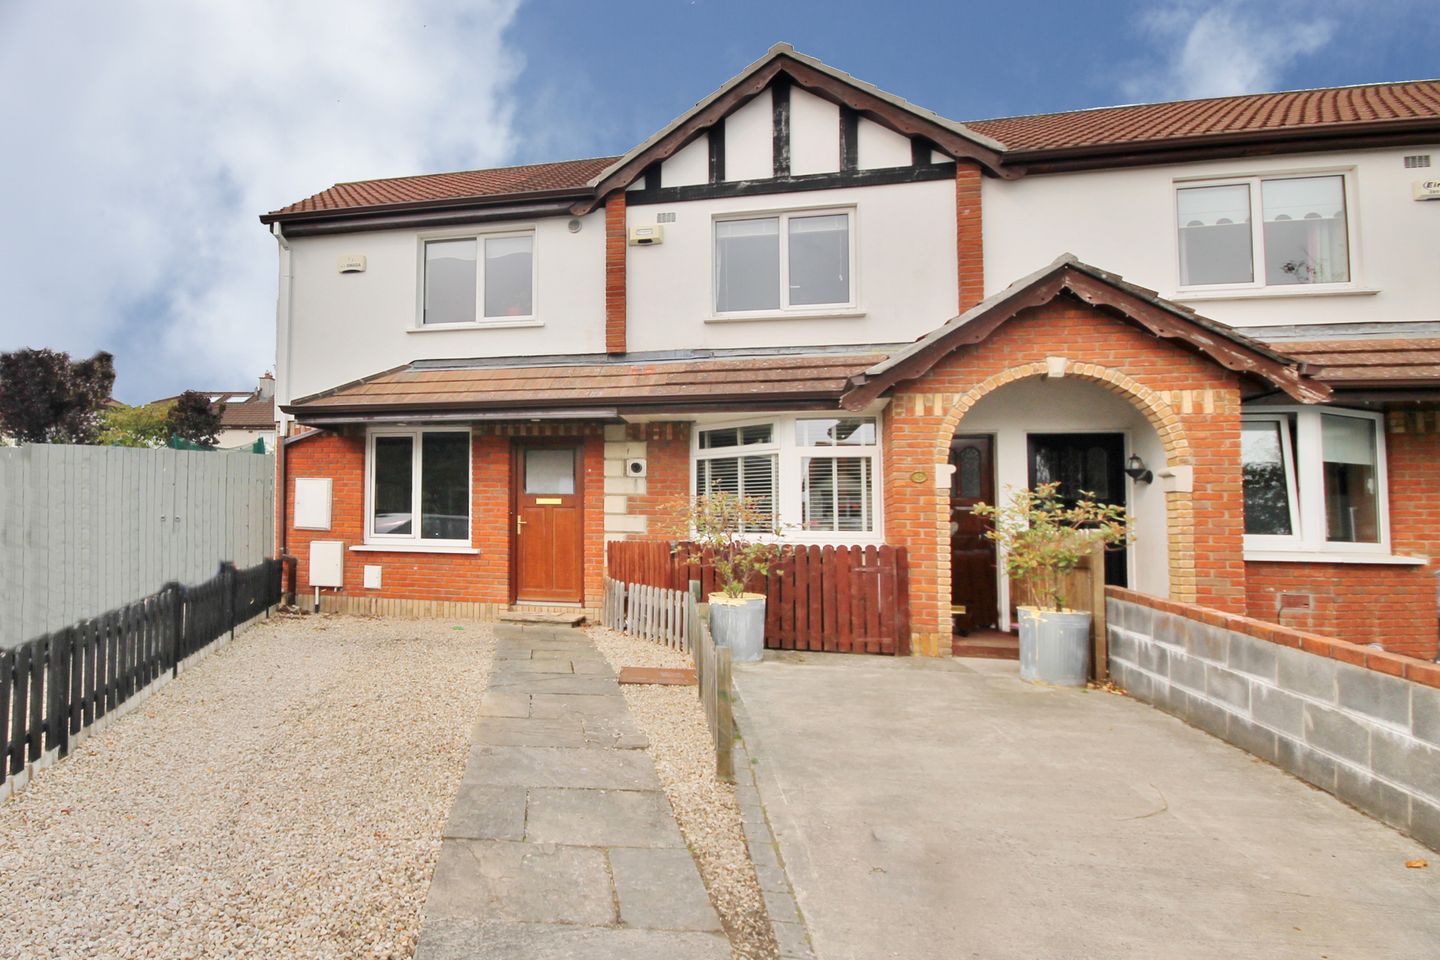 6A Connawood Crescent, Bray, Co. Wicklow, A98V8C3